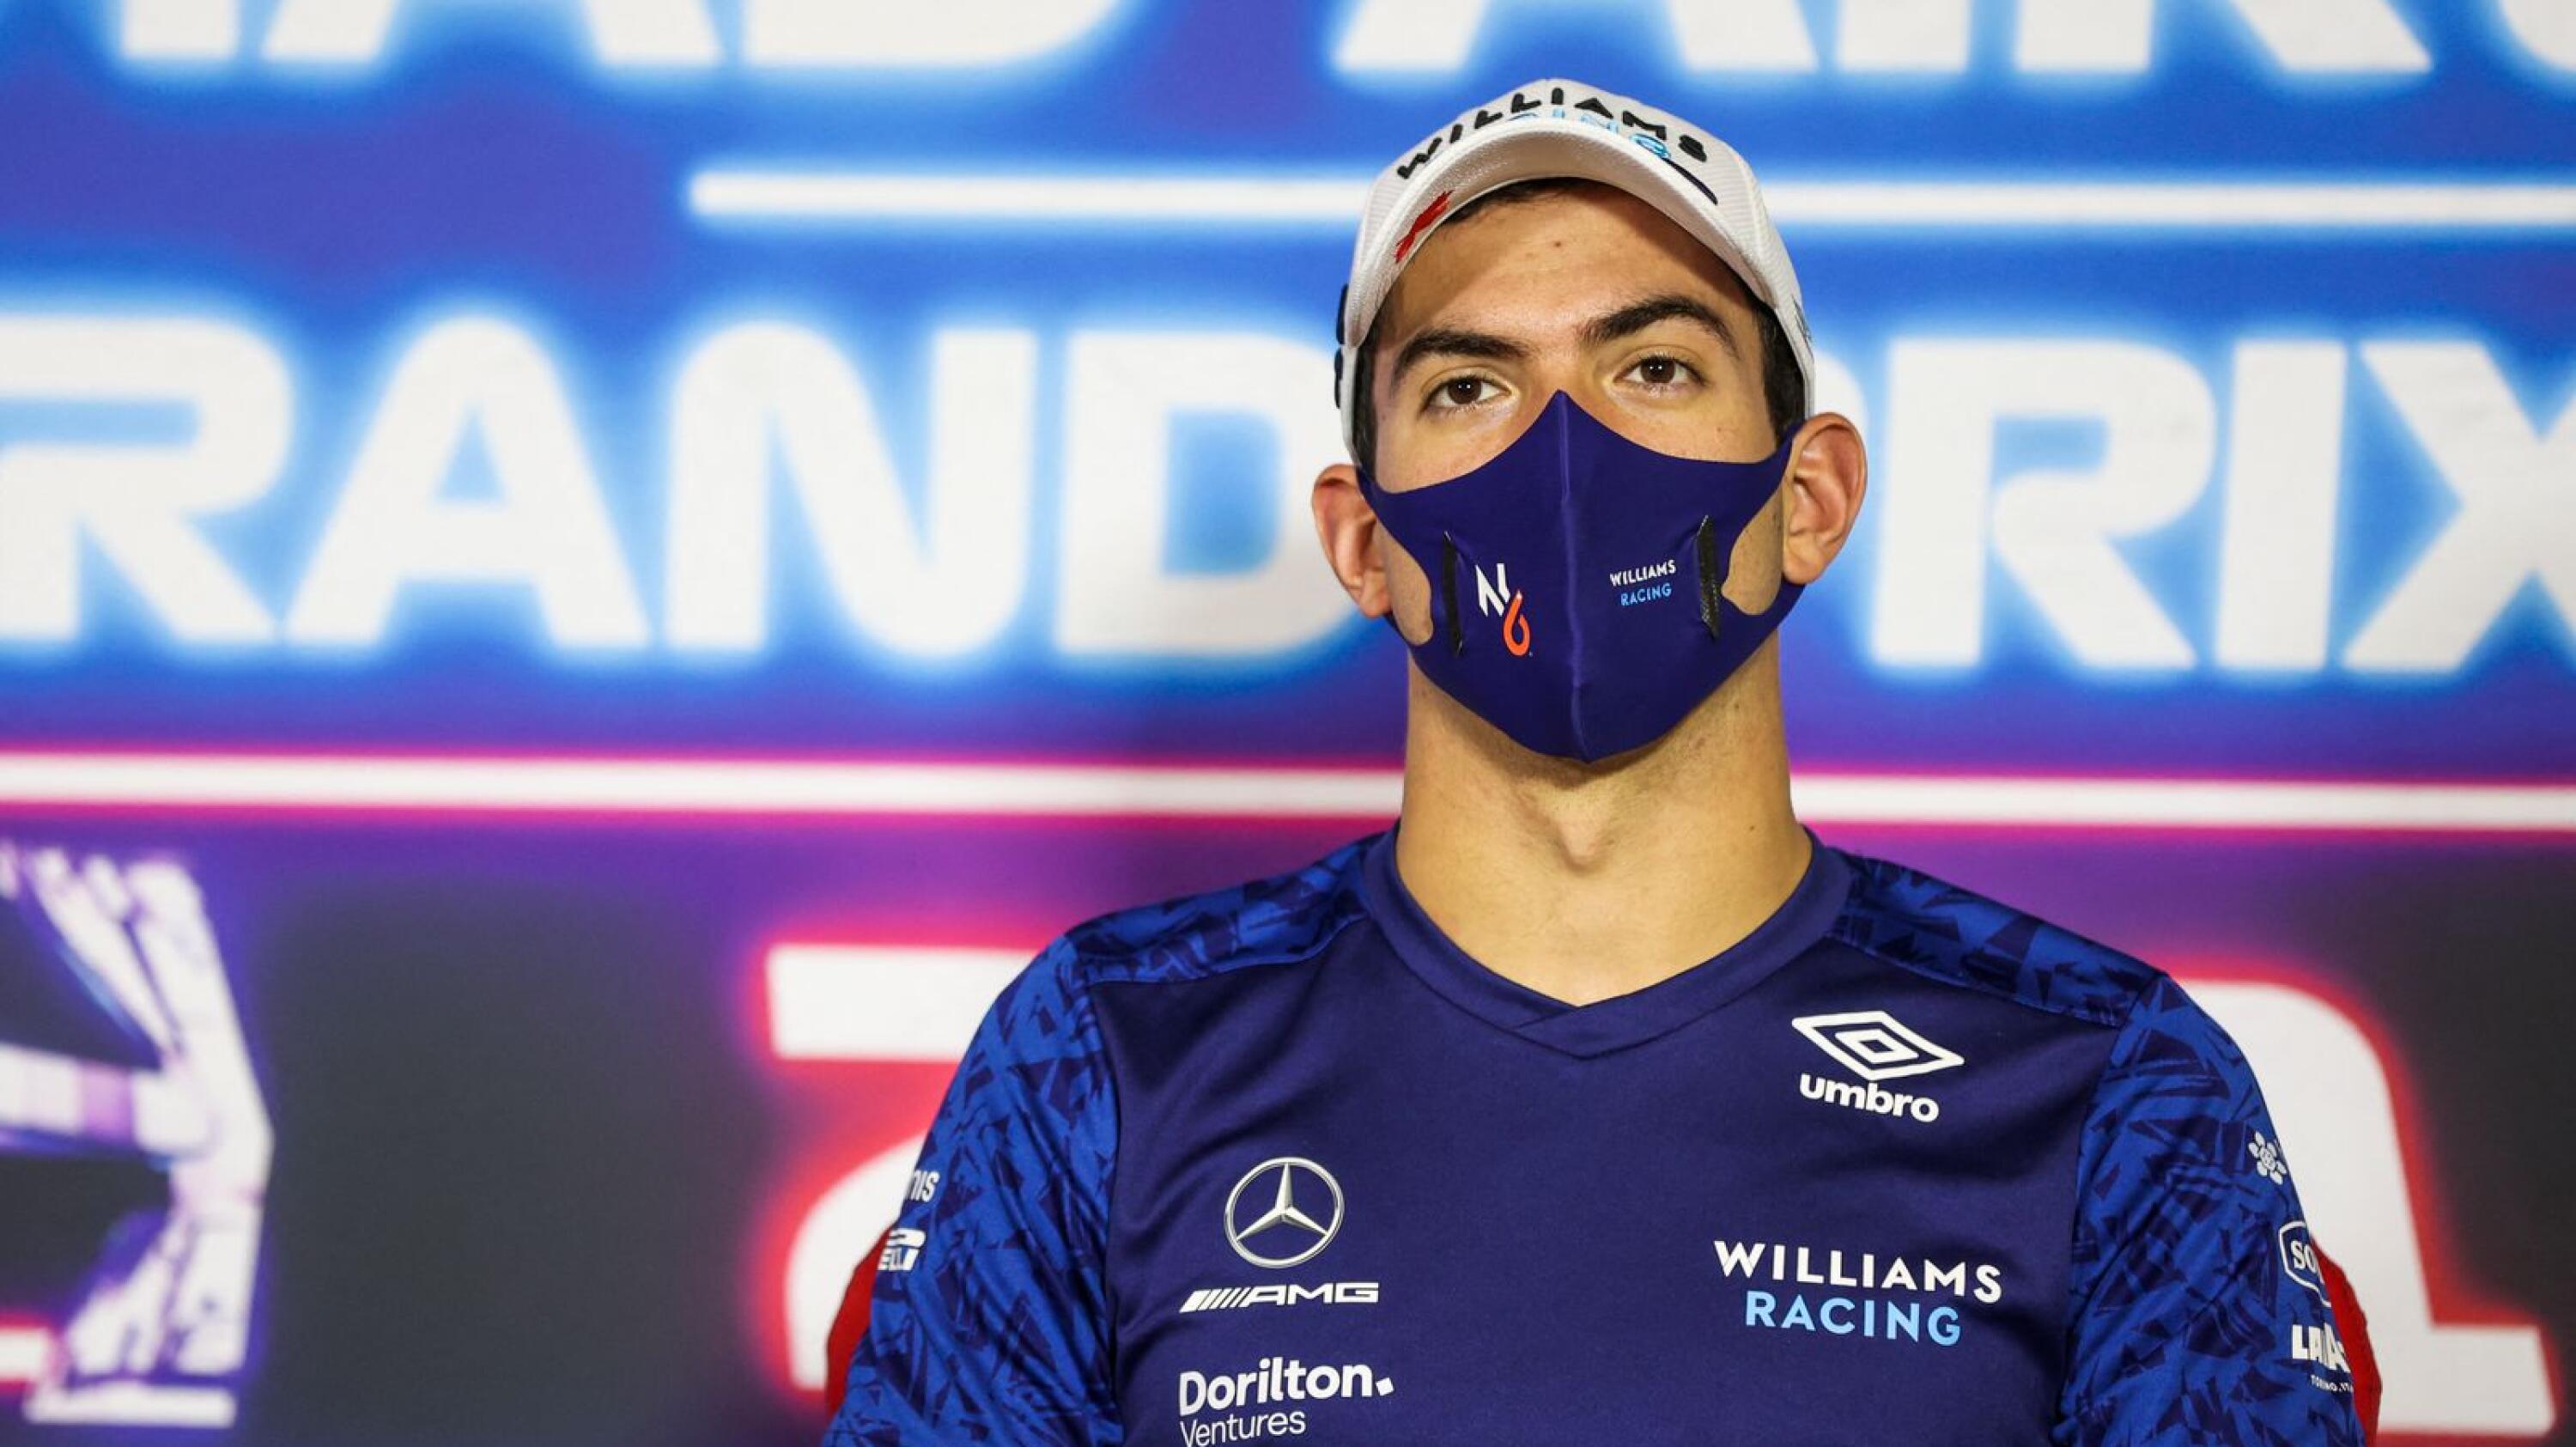 Williams' Canadian driver Nicholas Latifi gives a press conference ahead of the Abu Dhabi Formula One Grand Prix at the Yas Marina Circuit in the Emirati city of Abu Dhabi on December 9, 2021